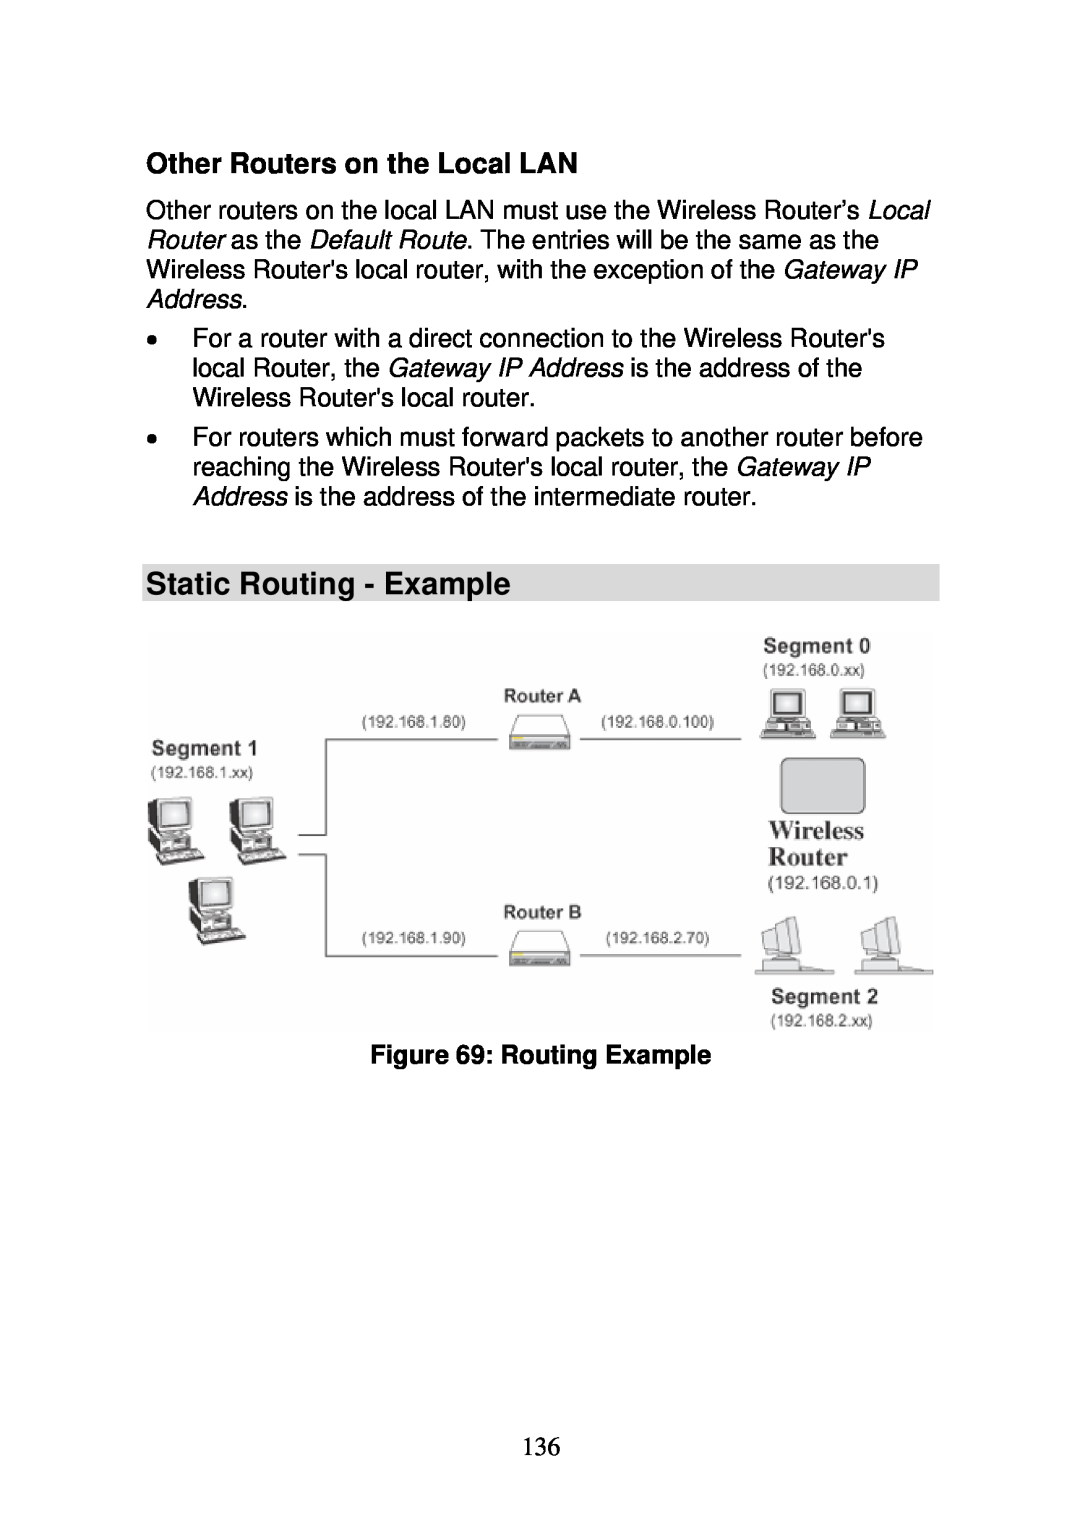 3Com WBR-6000 user manual Static Routing - Example, Other Routers on the Local LAN, Routing Example 